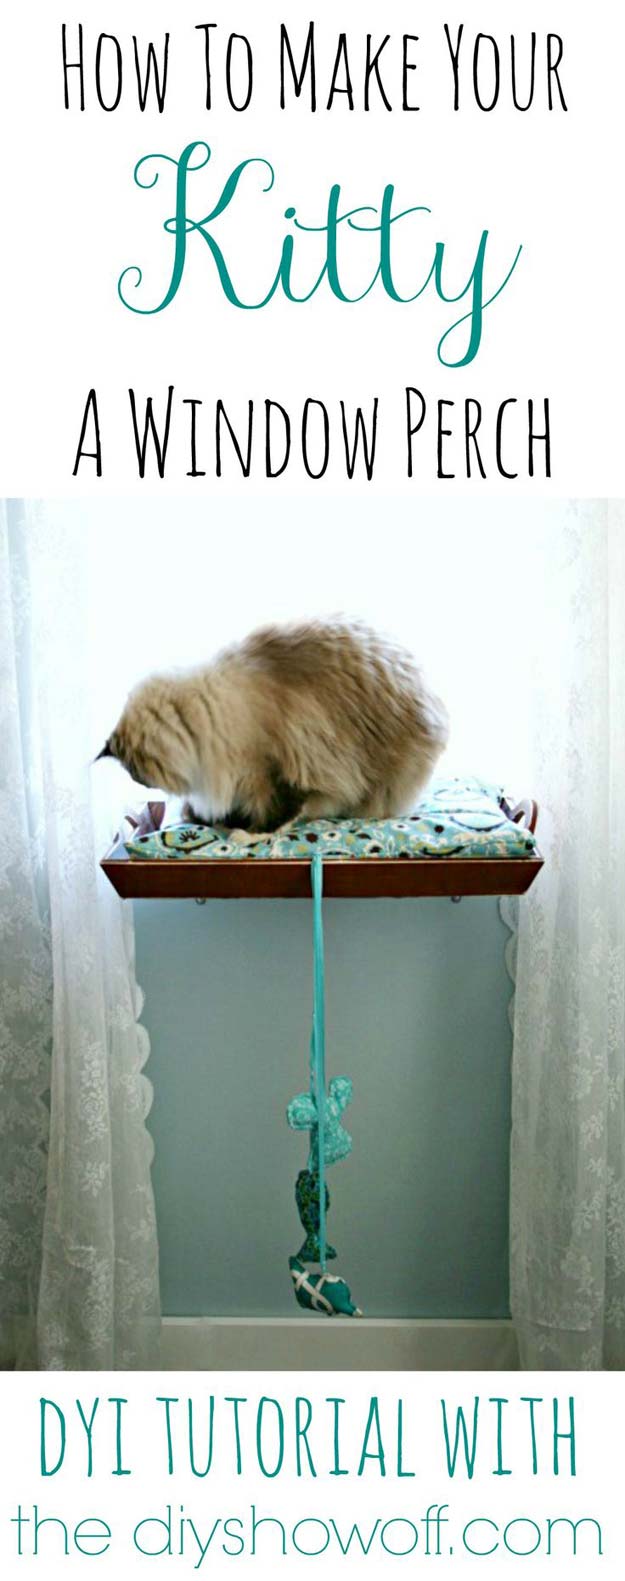 DIY Projects for Your Pet - Easy DIY Kitty Window Perch - Cat and Dog Beds, Treats, Collars and Easy Crafts to Make for Toys - Homemade Dog Biscuits, Food and Treats - Fun Ideas for Teen, Tweens and Adults to Make for Pets 